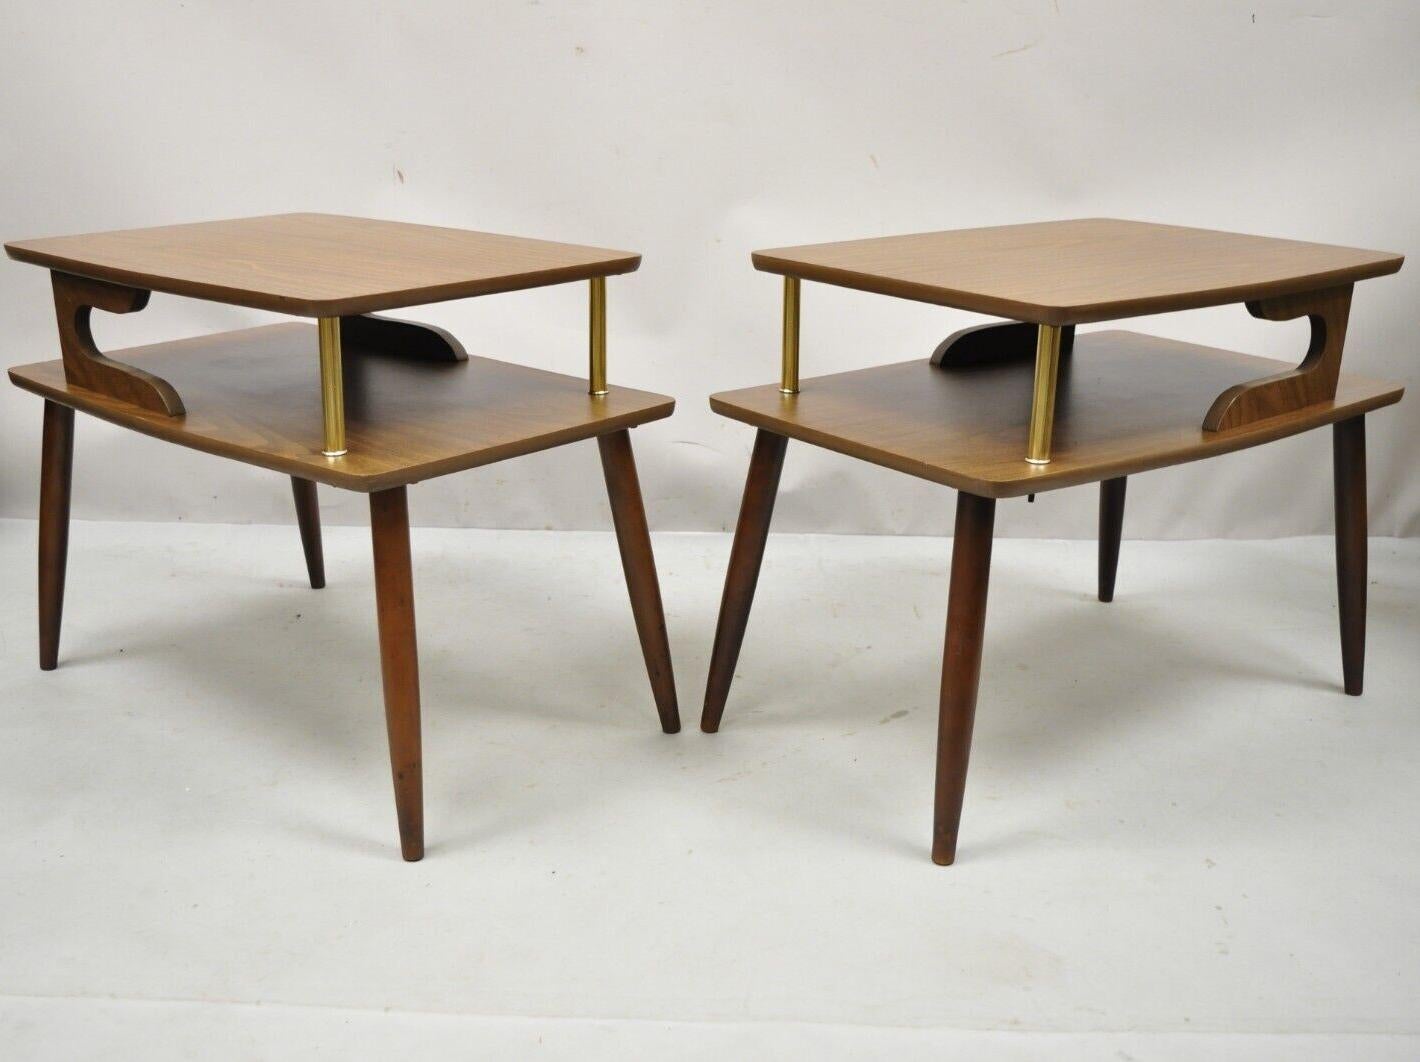 Mid Century Modern Walnut and Laminate Top 2 Tier Step Up End Tables - a Pair. Item features 2 tiers, laminate wood grain tops, tapered legs, brass accents, great style and form. Circa mid 20th Century. Measurements: 20.5